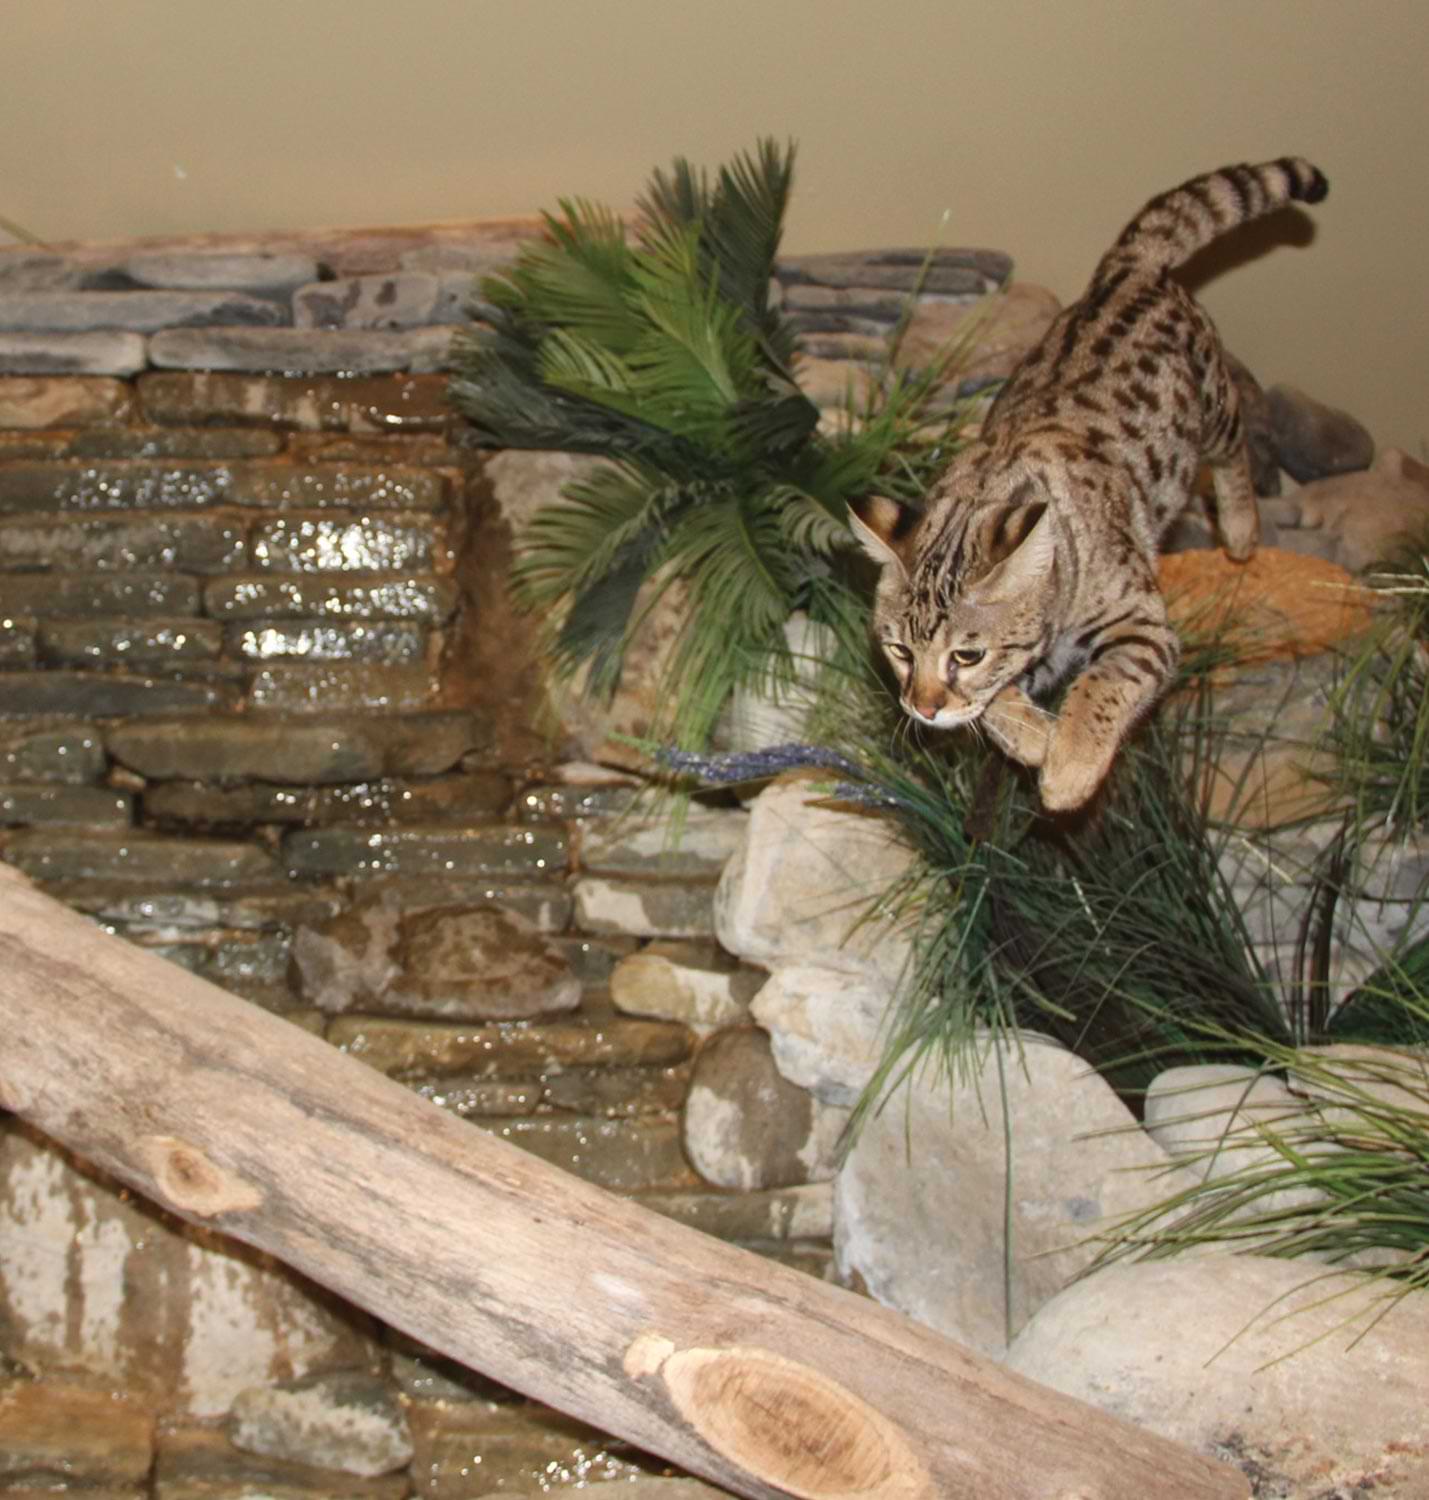 a cat in mid jump over an indoor fountain dressed with plants and logs